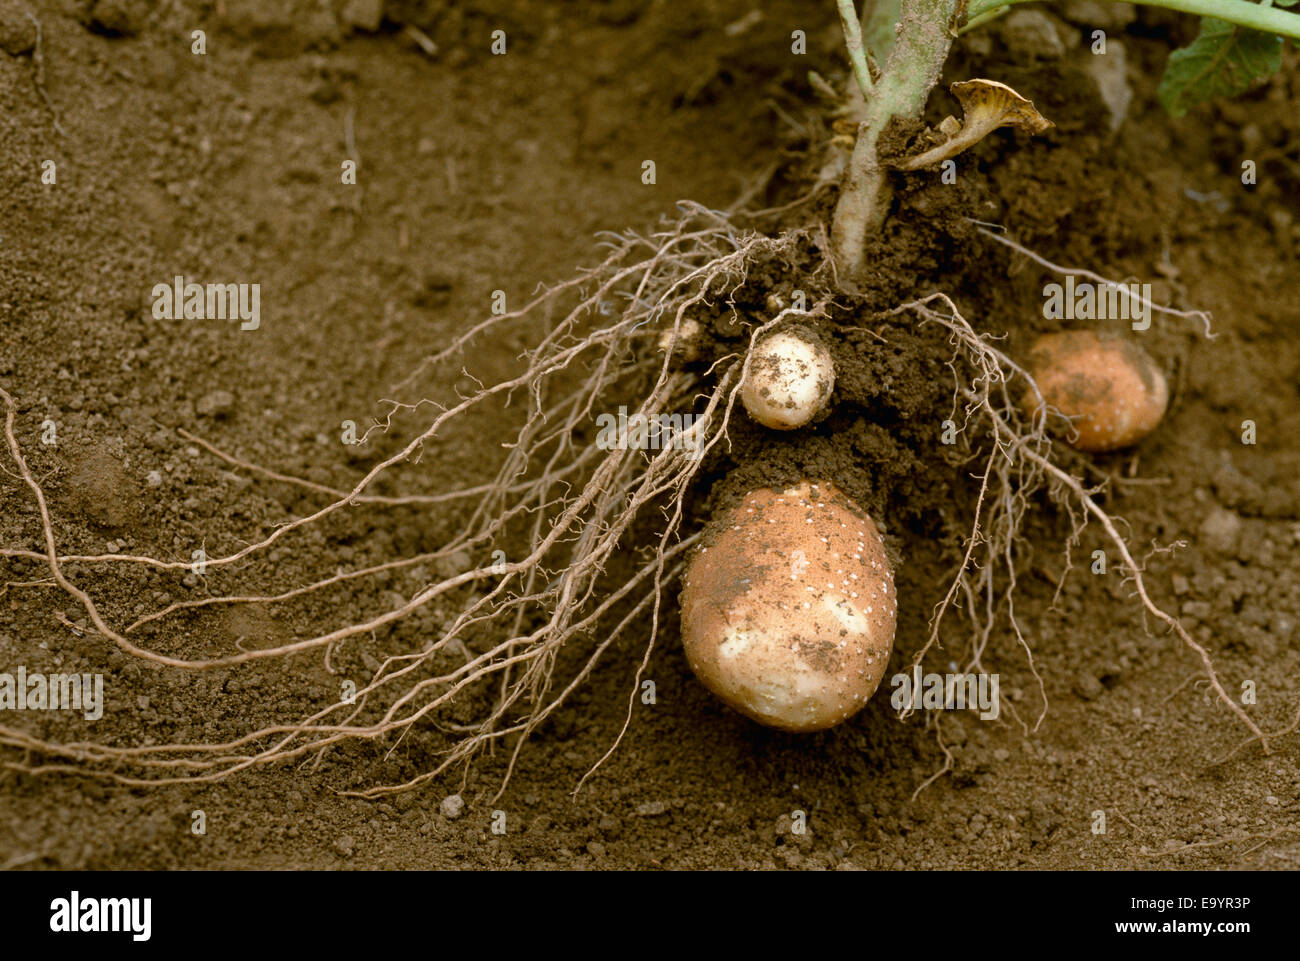 Russet potato plant in pre-bloom stage shows exposed fibrous root system and immature potatoes / Yakima County, Washington, USA. Stock Photo